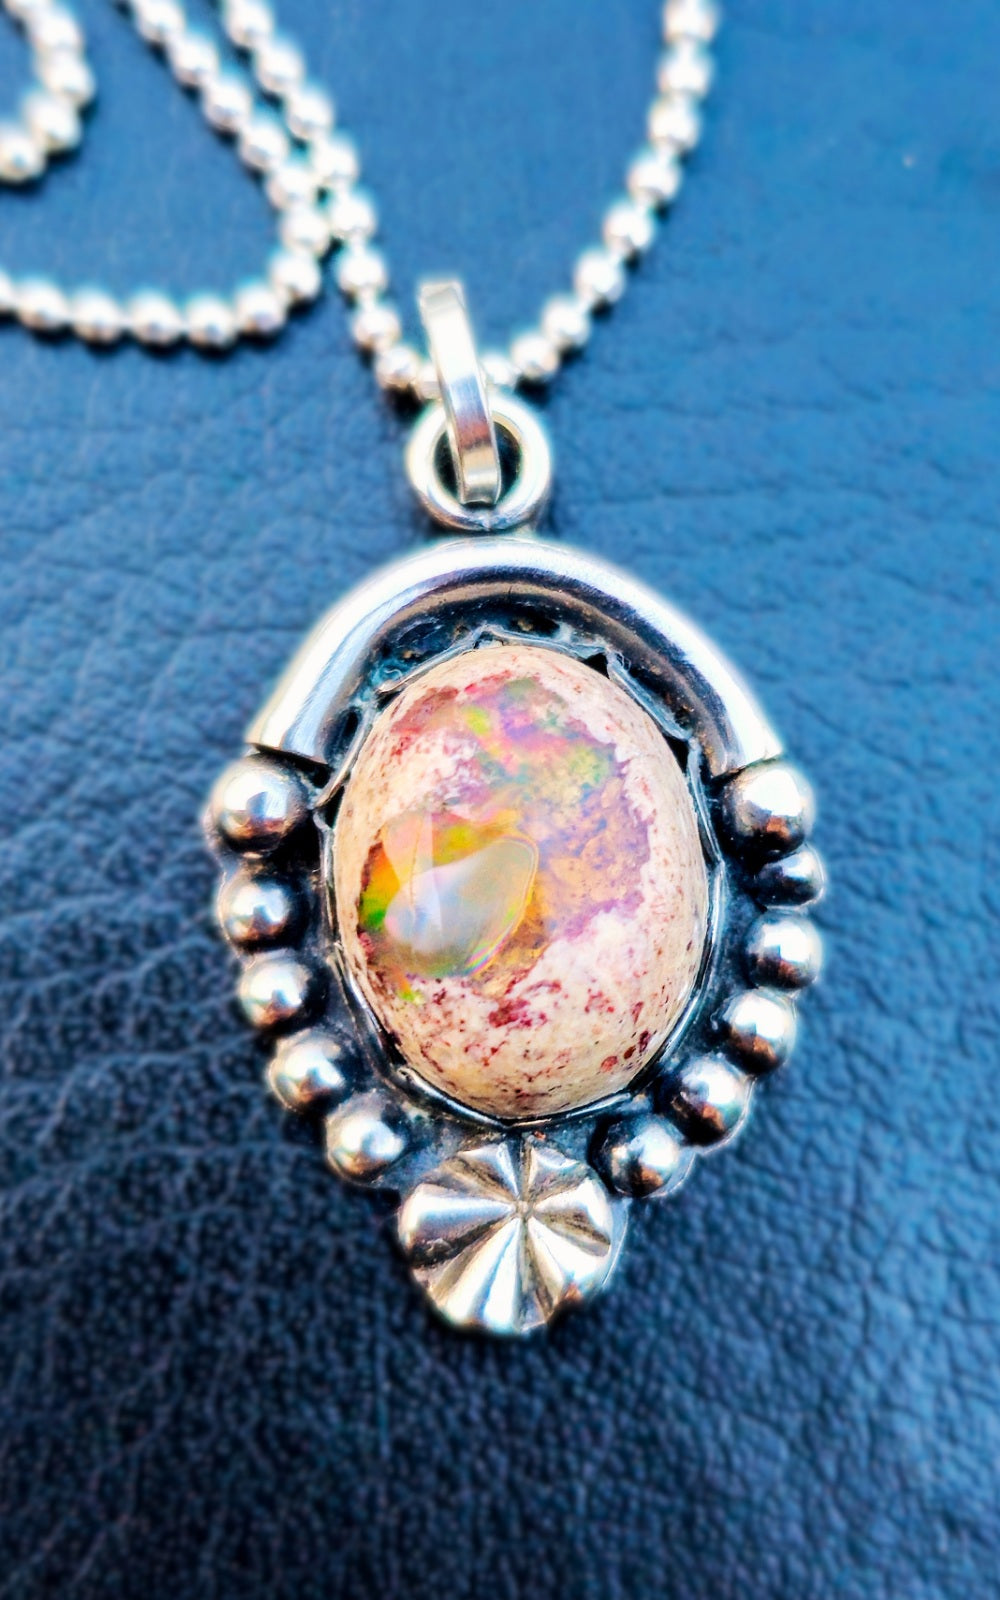 Mexican Fire Opal Pendant - A Unique and Radiant October Birthstone Jewelry